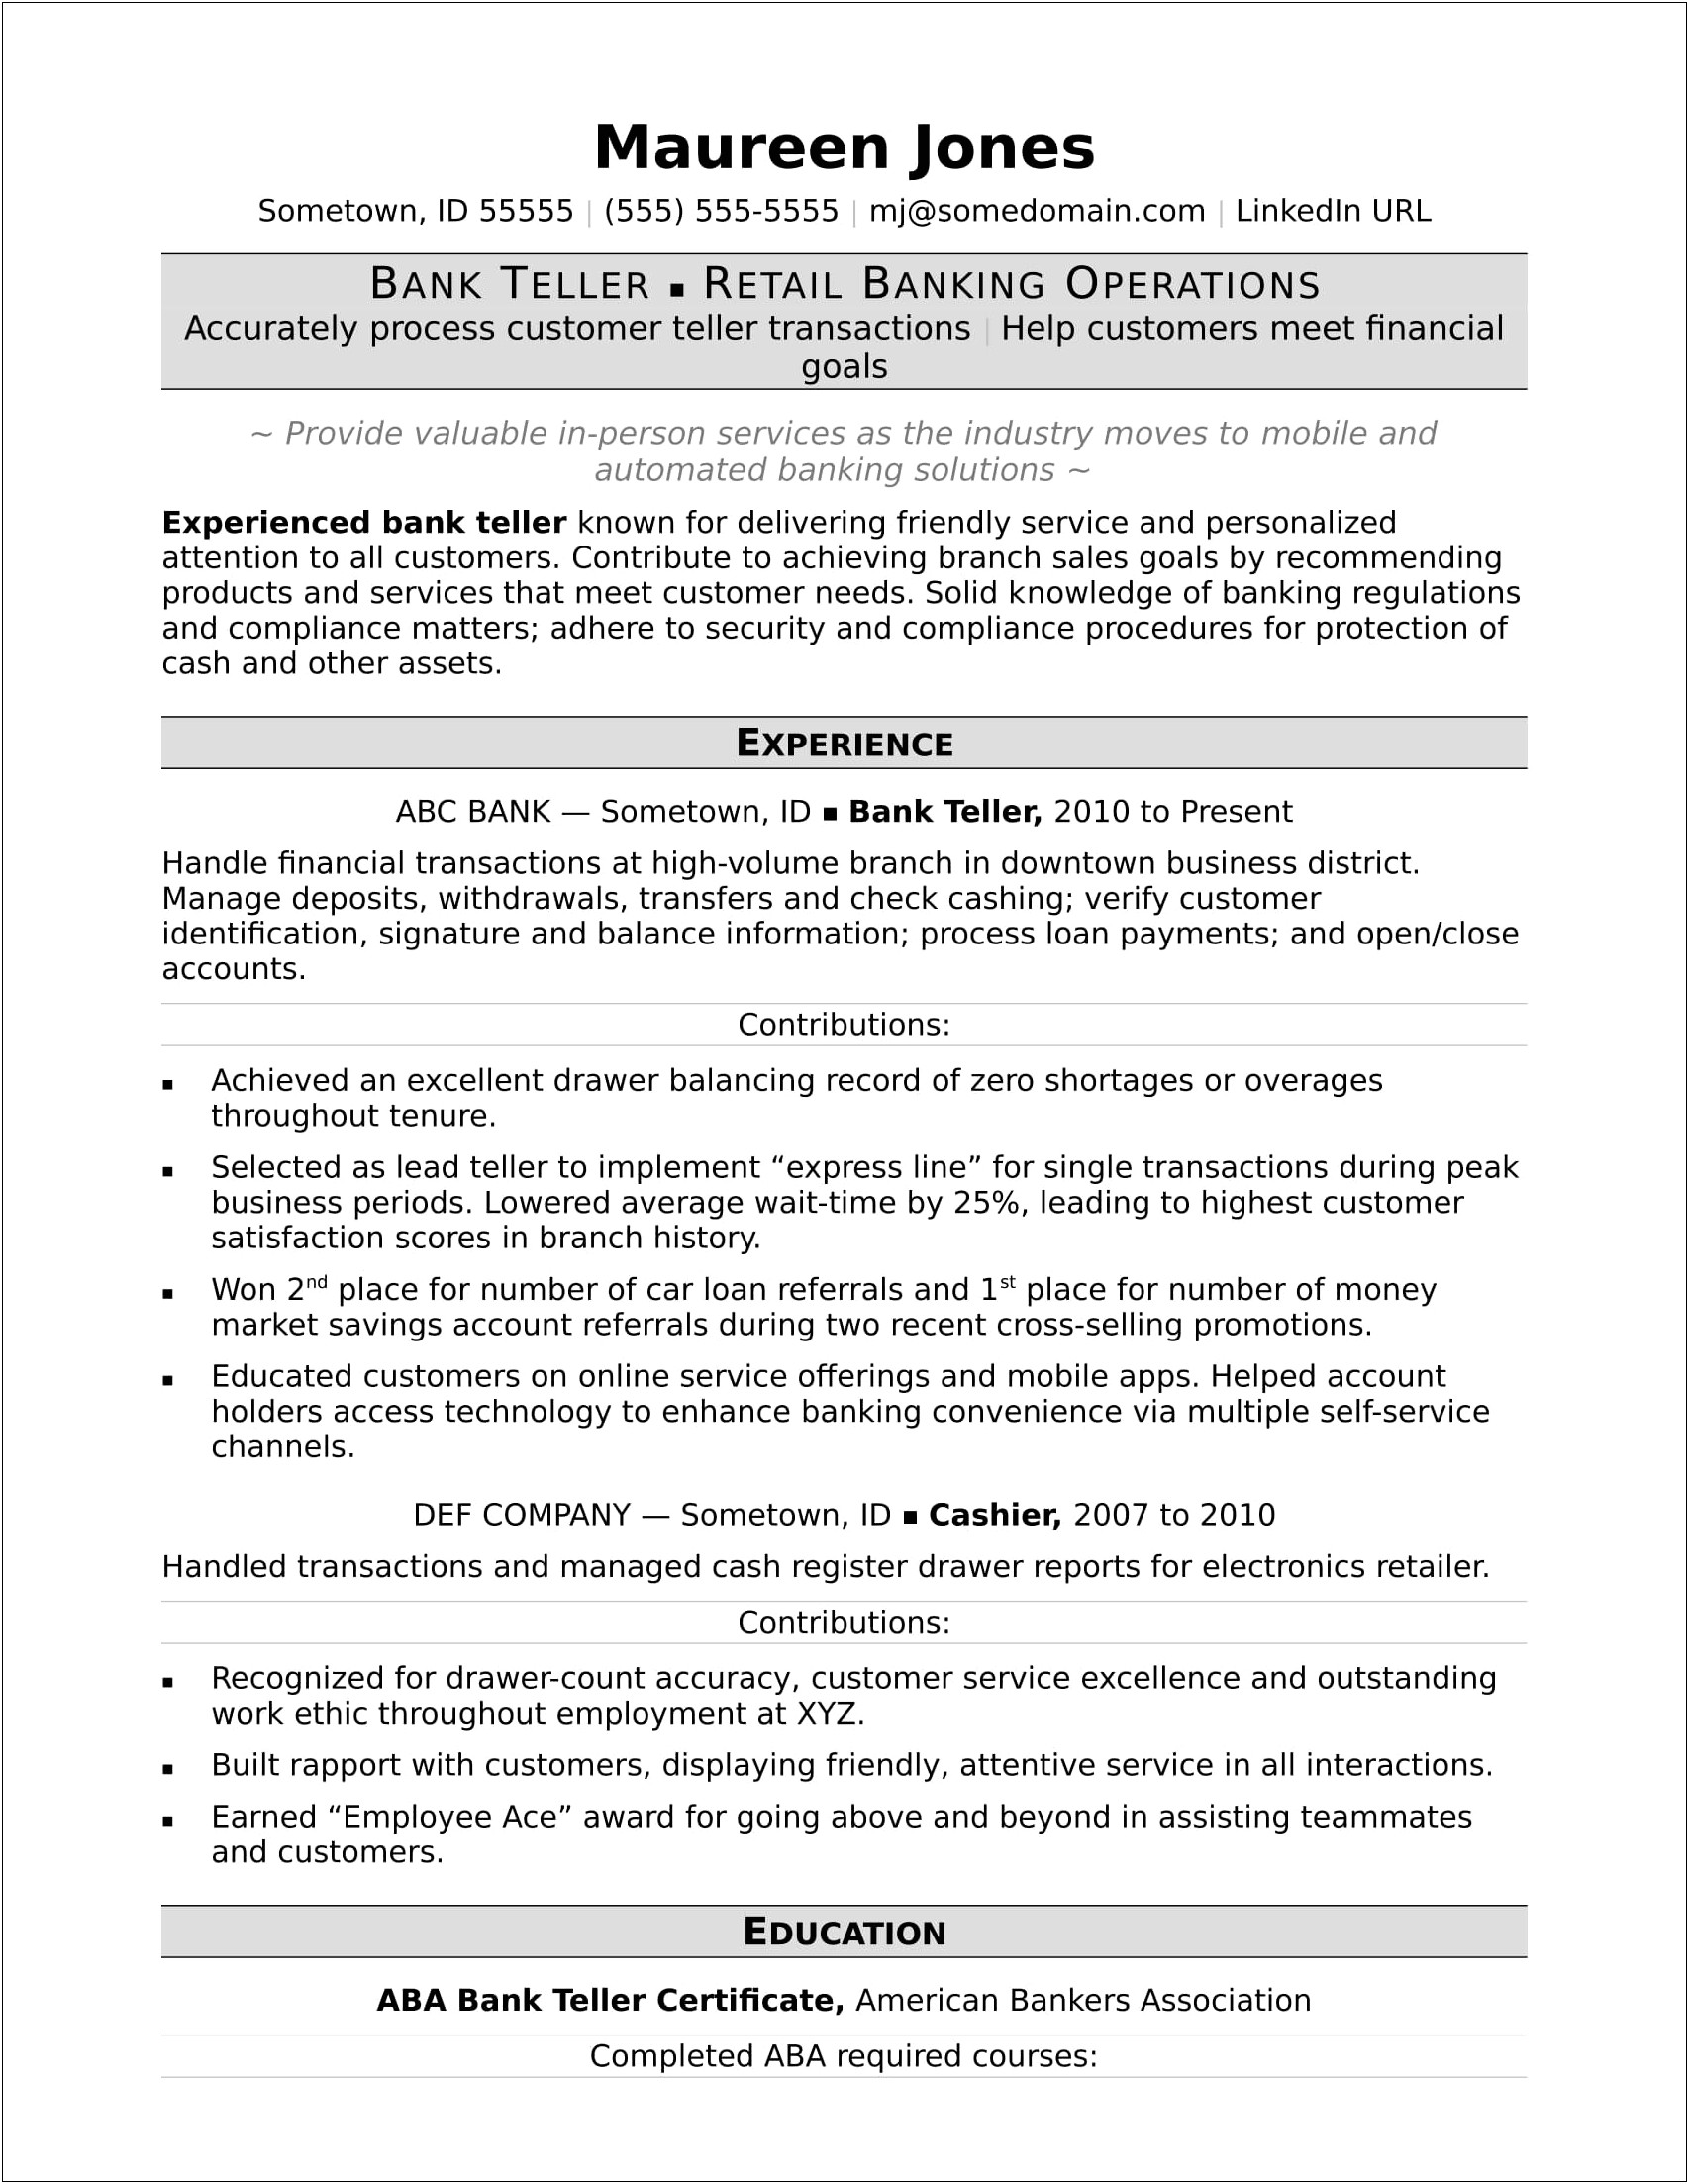 Example Resume Objective Financial Services Industry